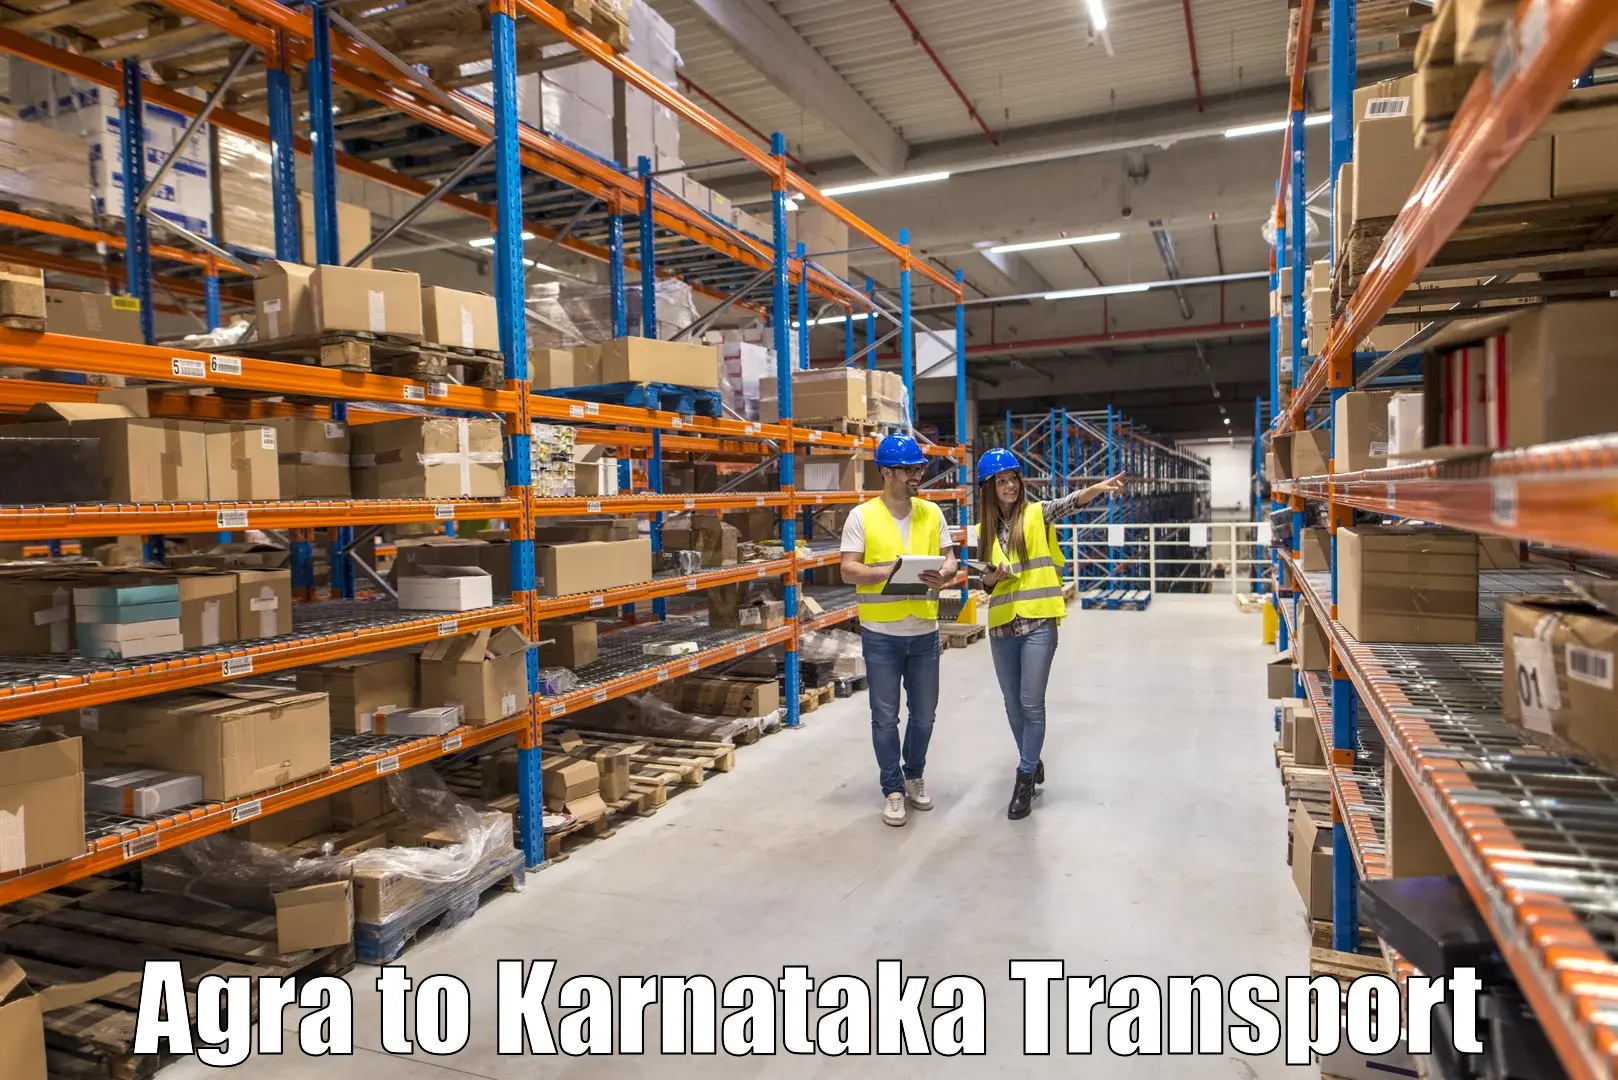 Daily transport service Agra to Mangalore Port